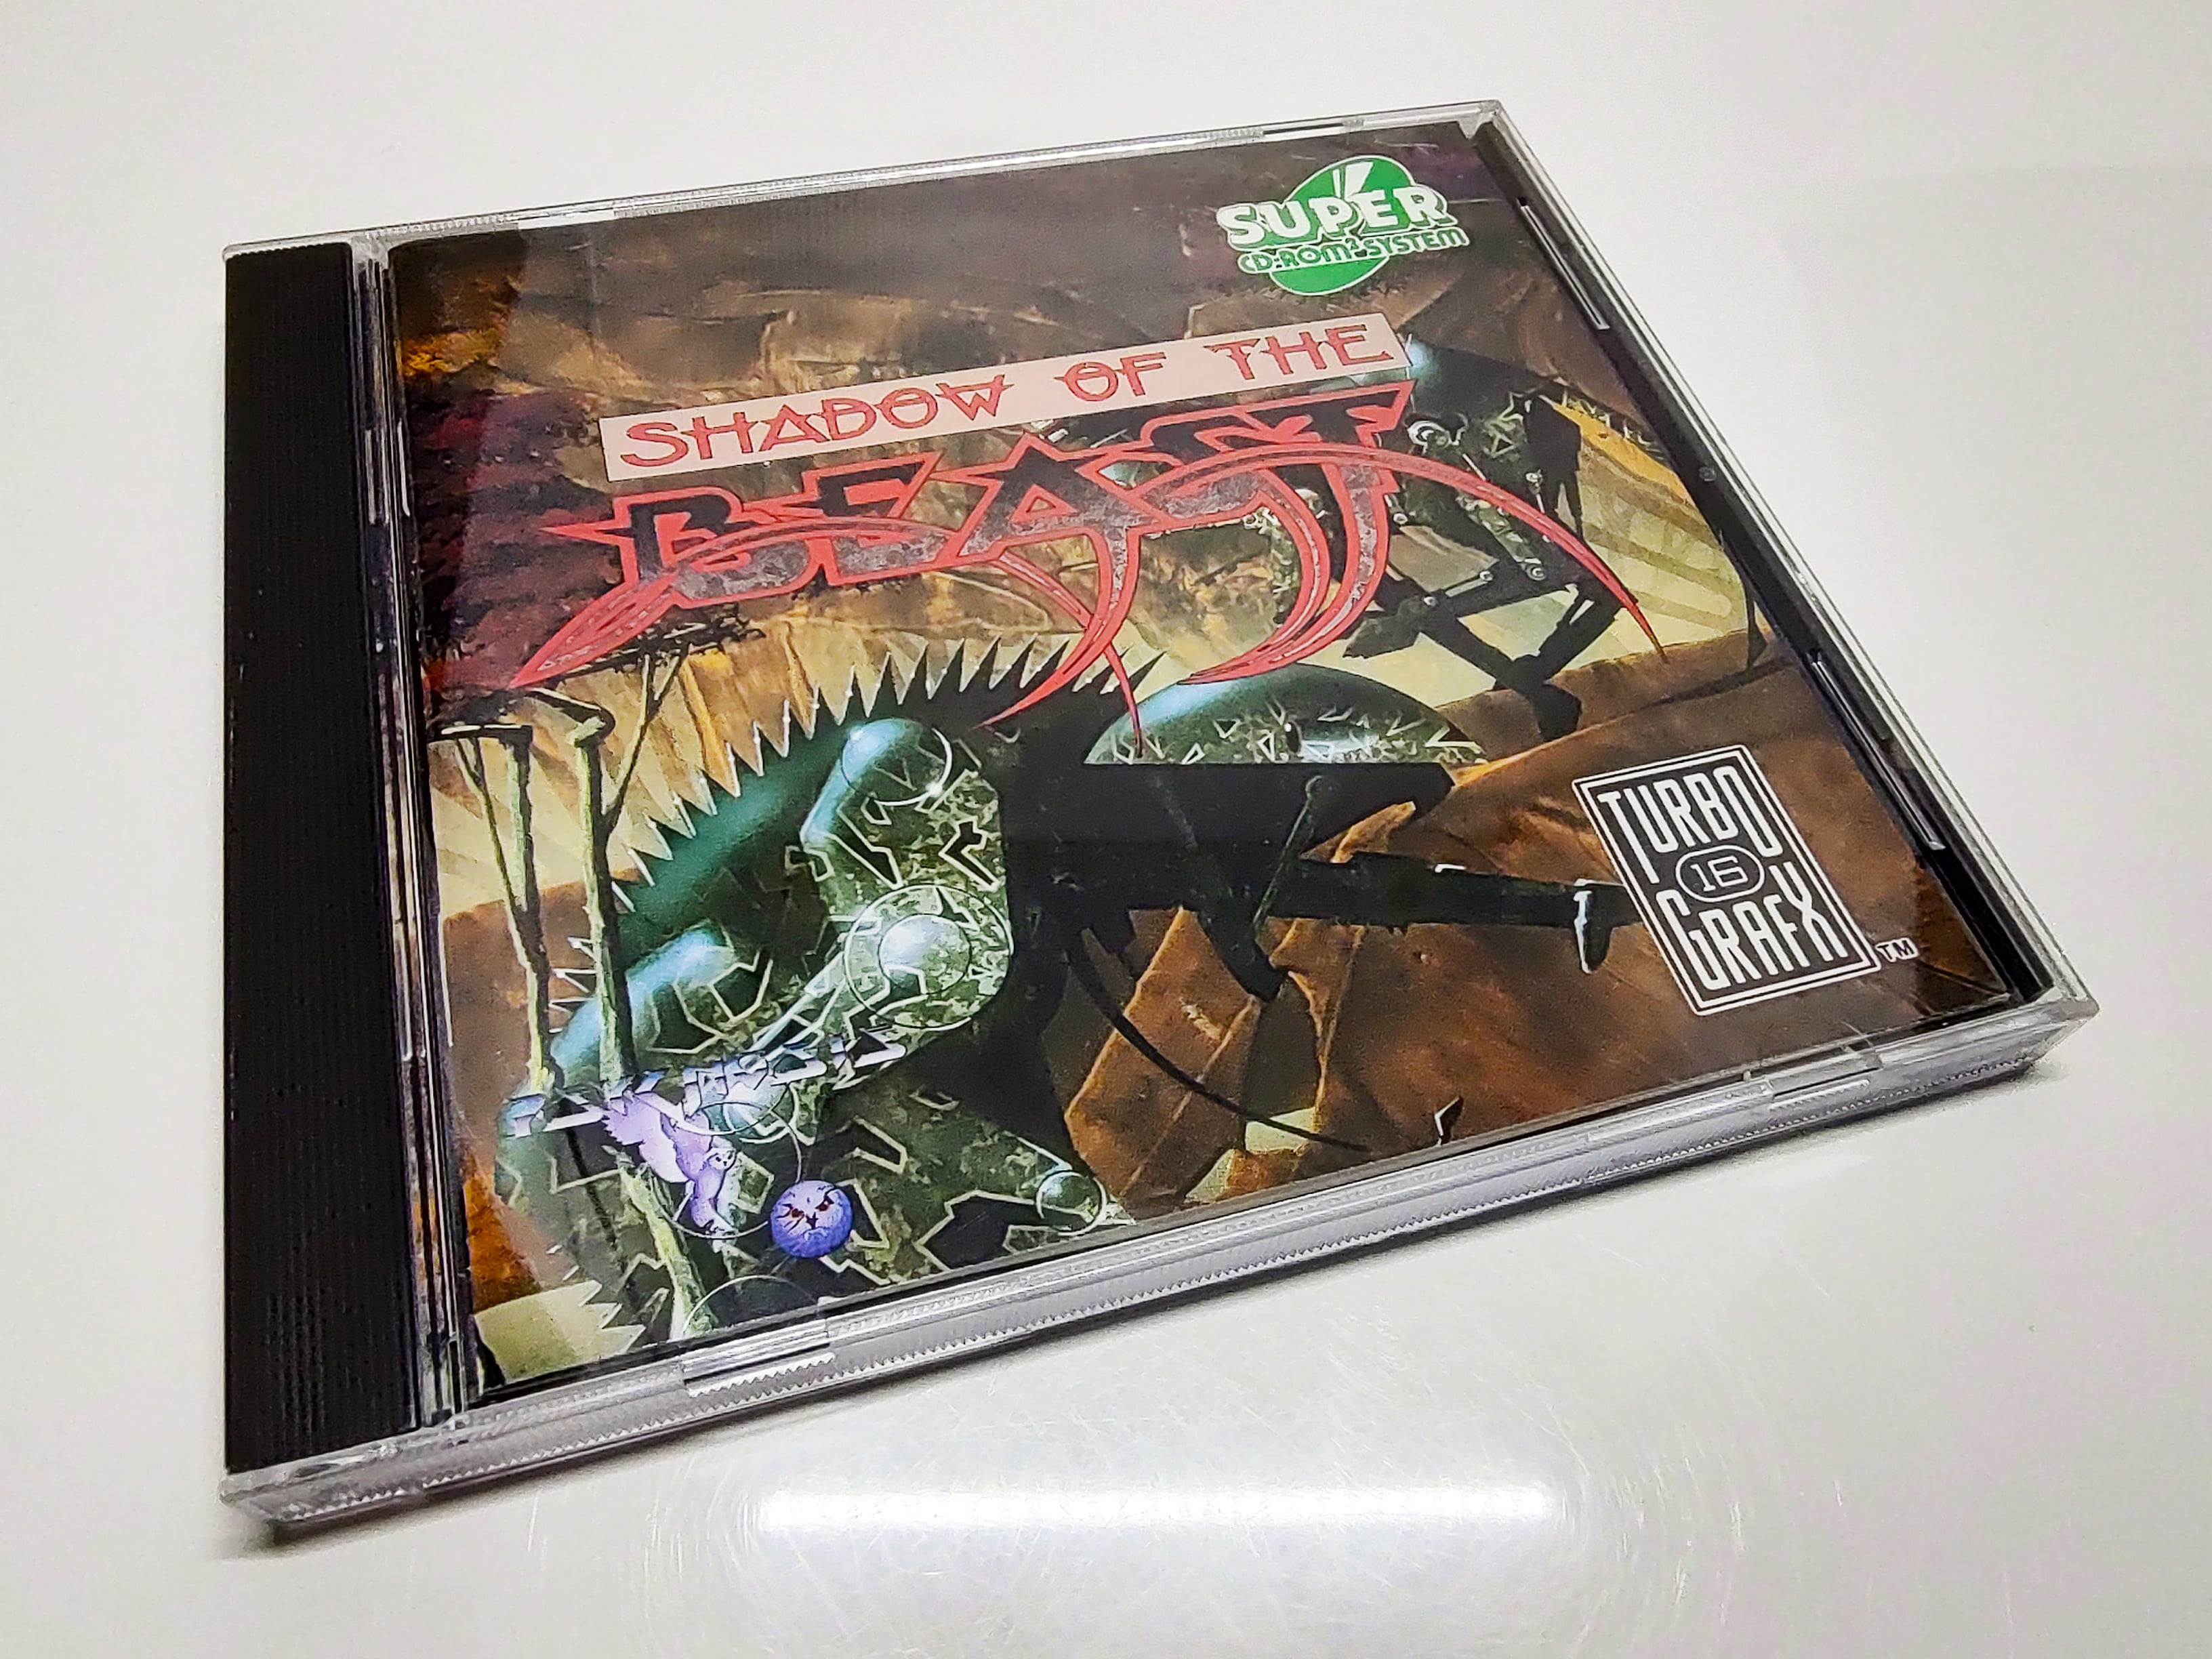 Shadow of the Beast | TurboGrafx-16 Super CD | Case